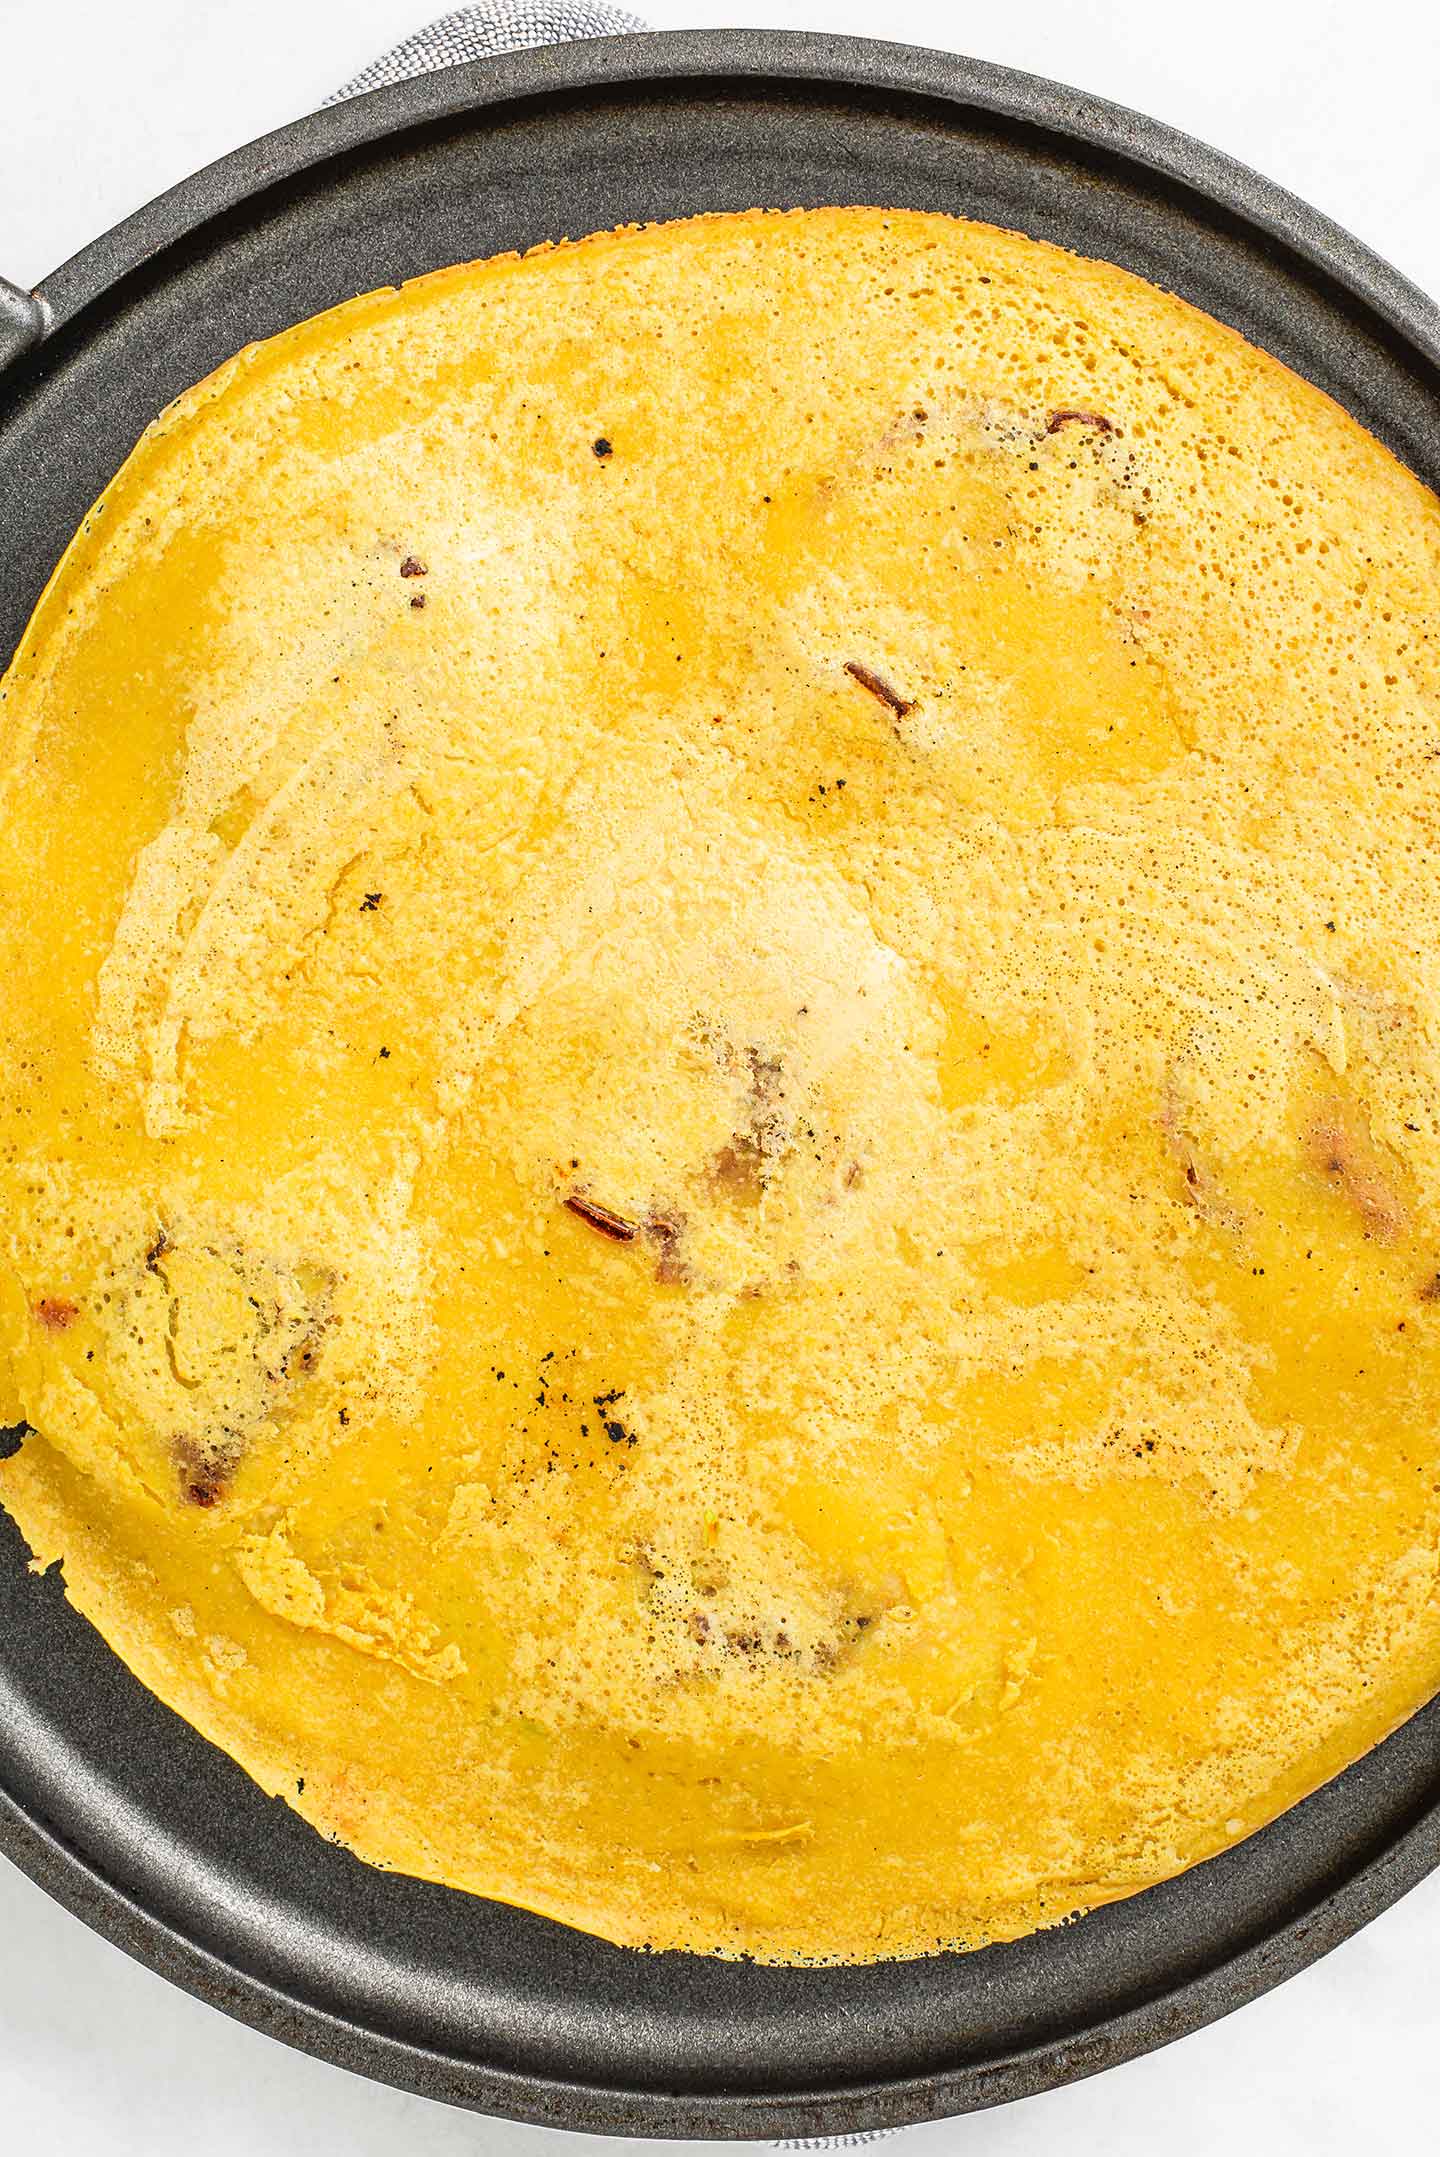 Top down view of a golden chickpea omelette flipped on a non-stick skillet so the top can cook.